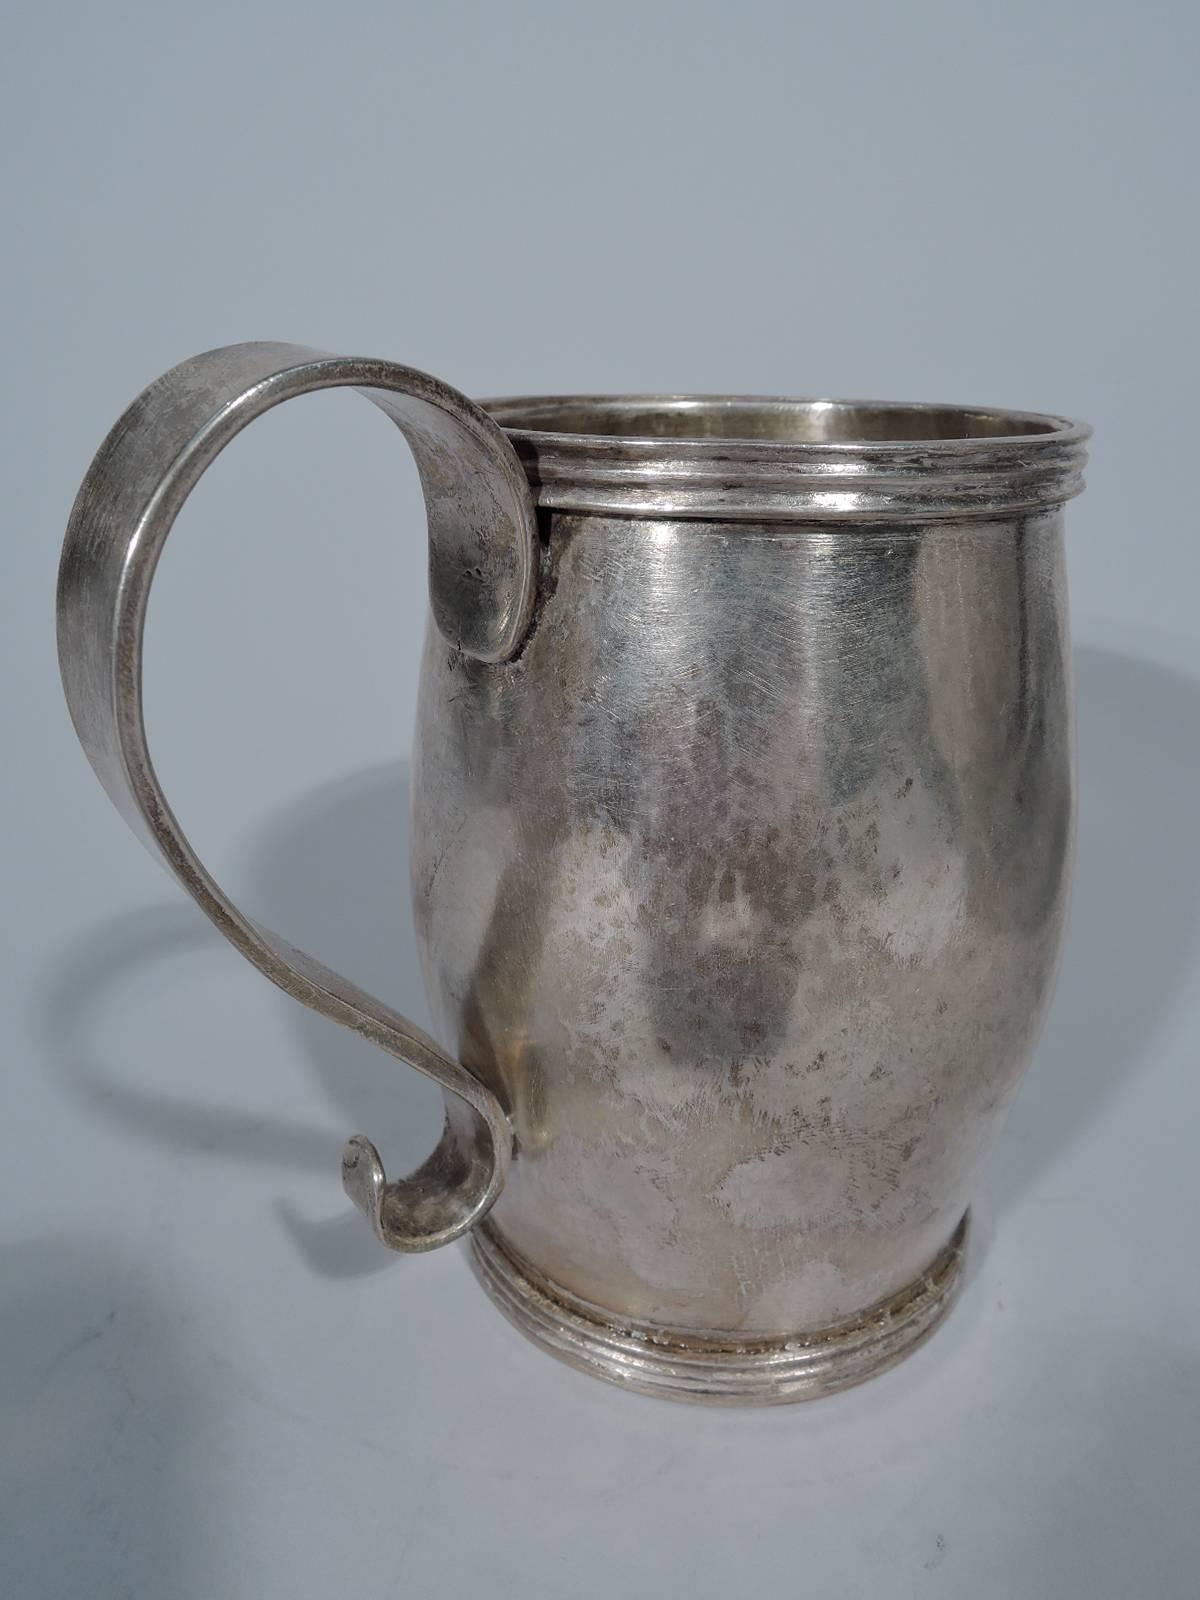 Antique South American silver mug, circa 1850. Barrel form body with reeded rims and fancy scroll handle. Handmade and hand-hammered. Condition: Excellent with wonderful old patina.

Dimensions: H 5 x W 5 1/8 x D 3 3/8 in. Heavy weight: 14.2 troy